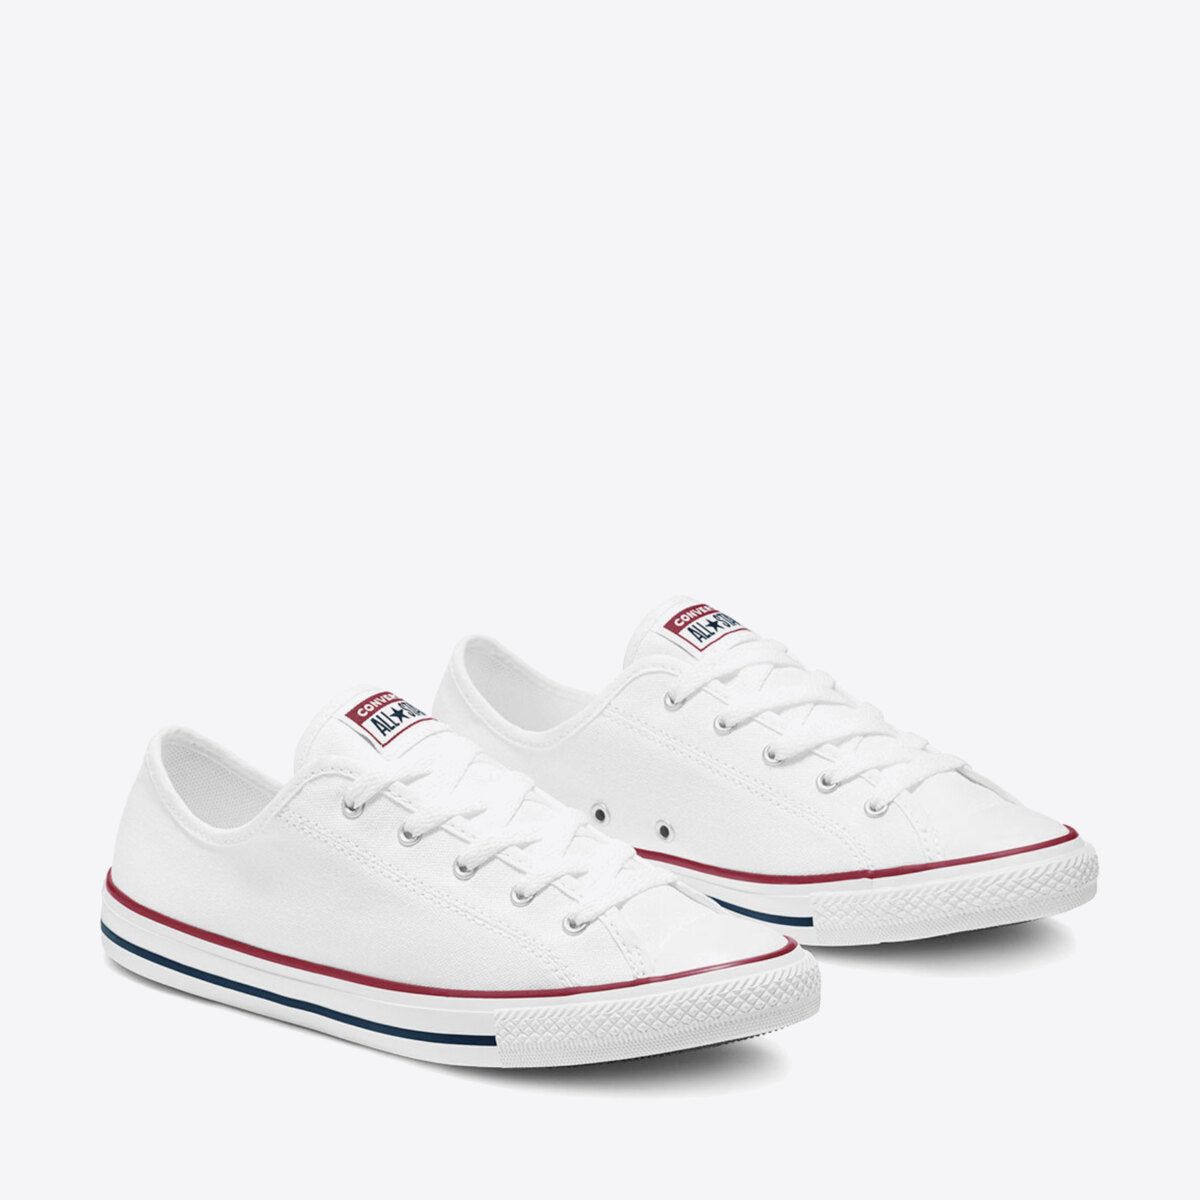 CONVERSE Dainty 2.0 Canvas Low White - Image 0